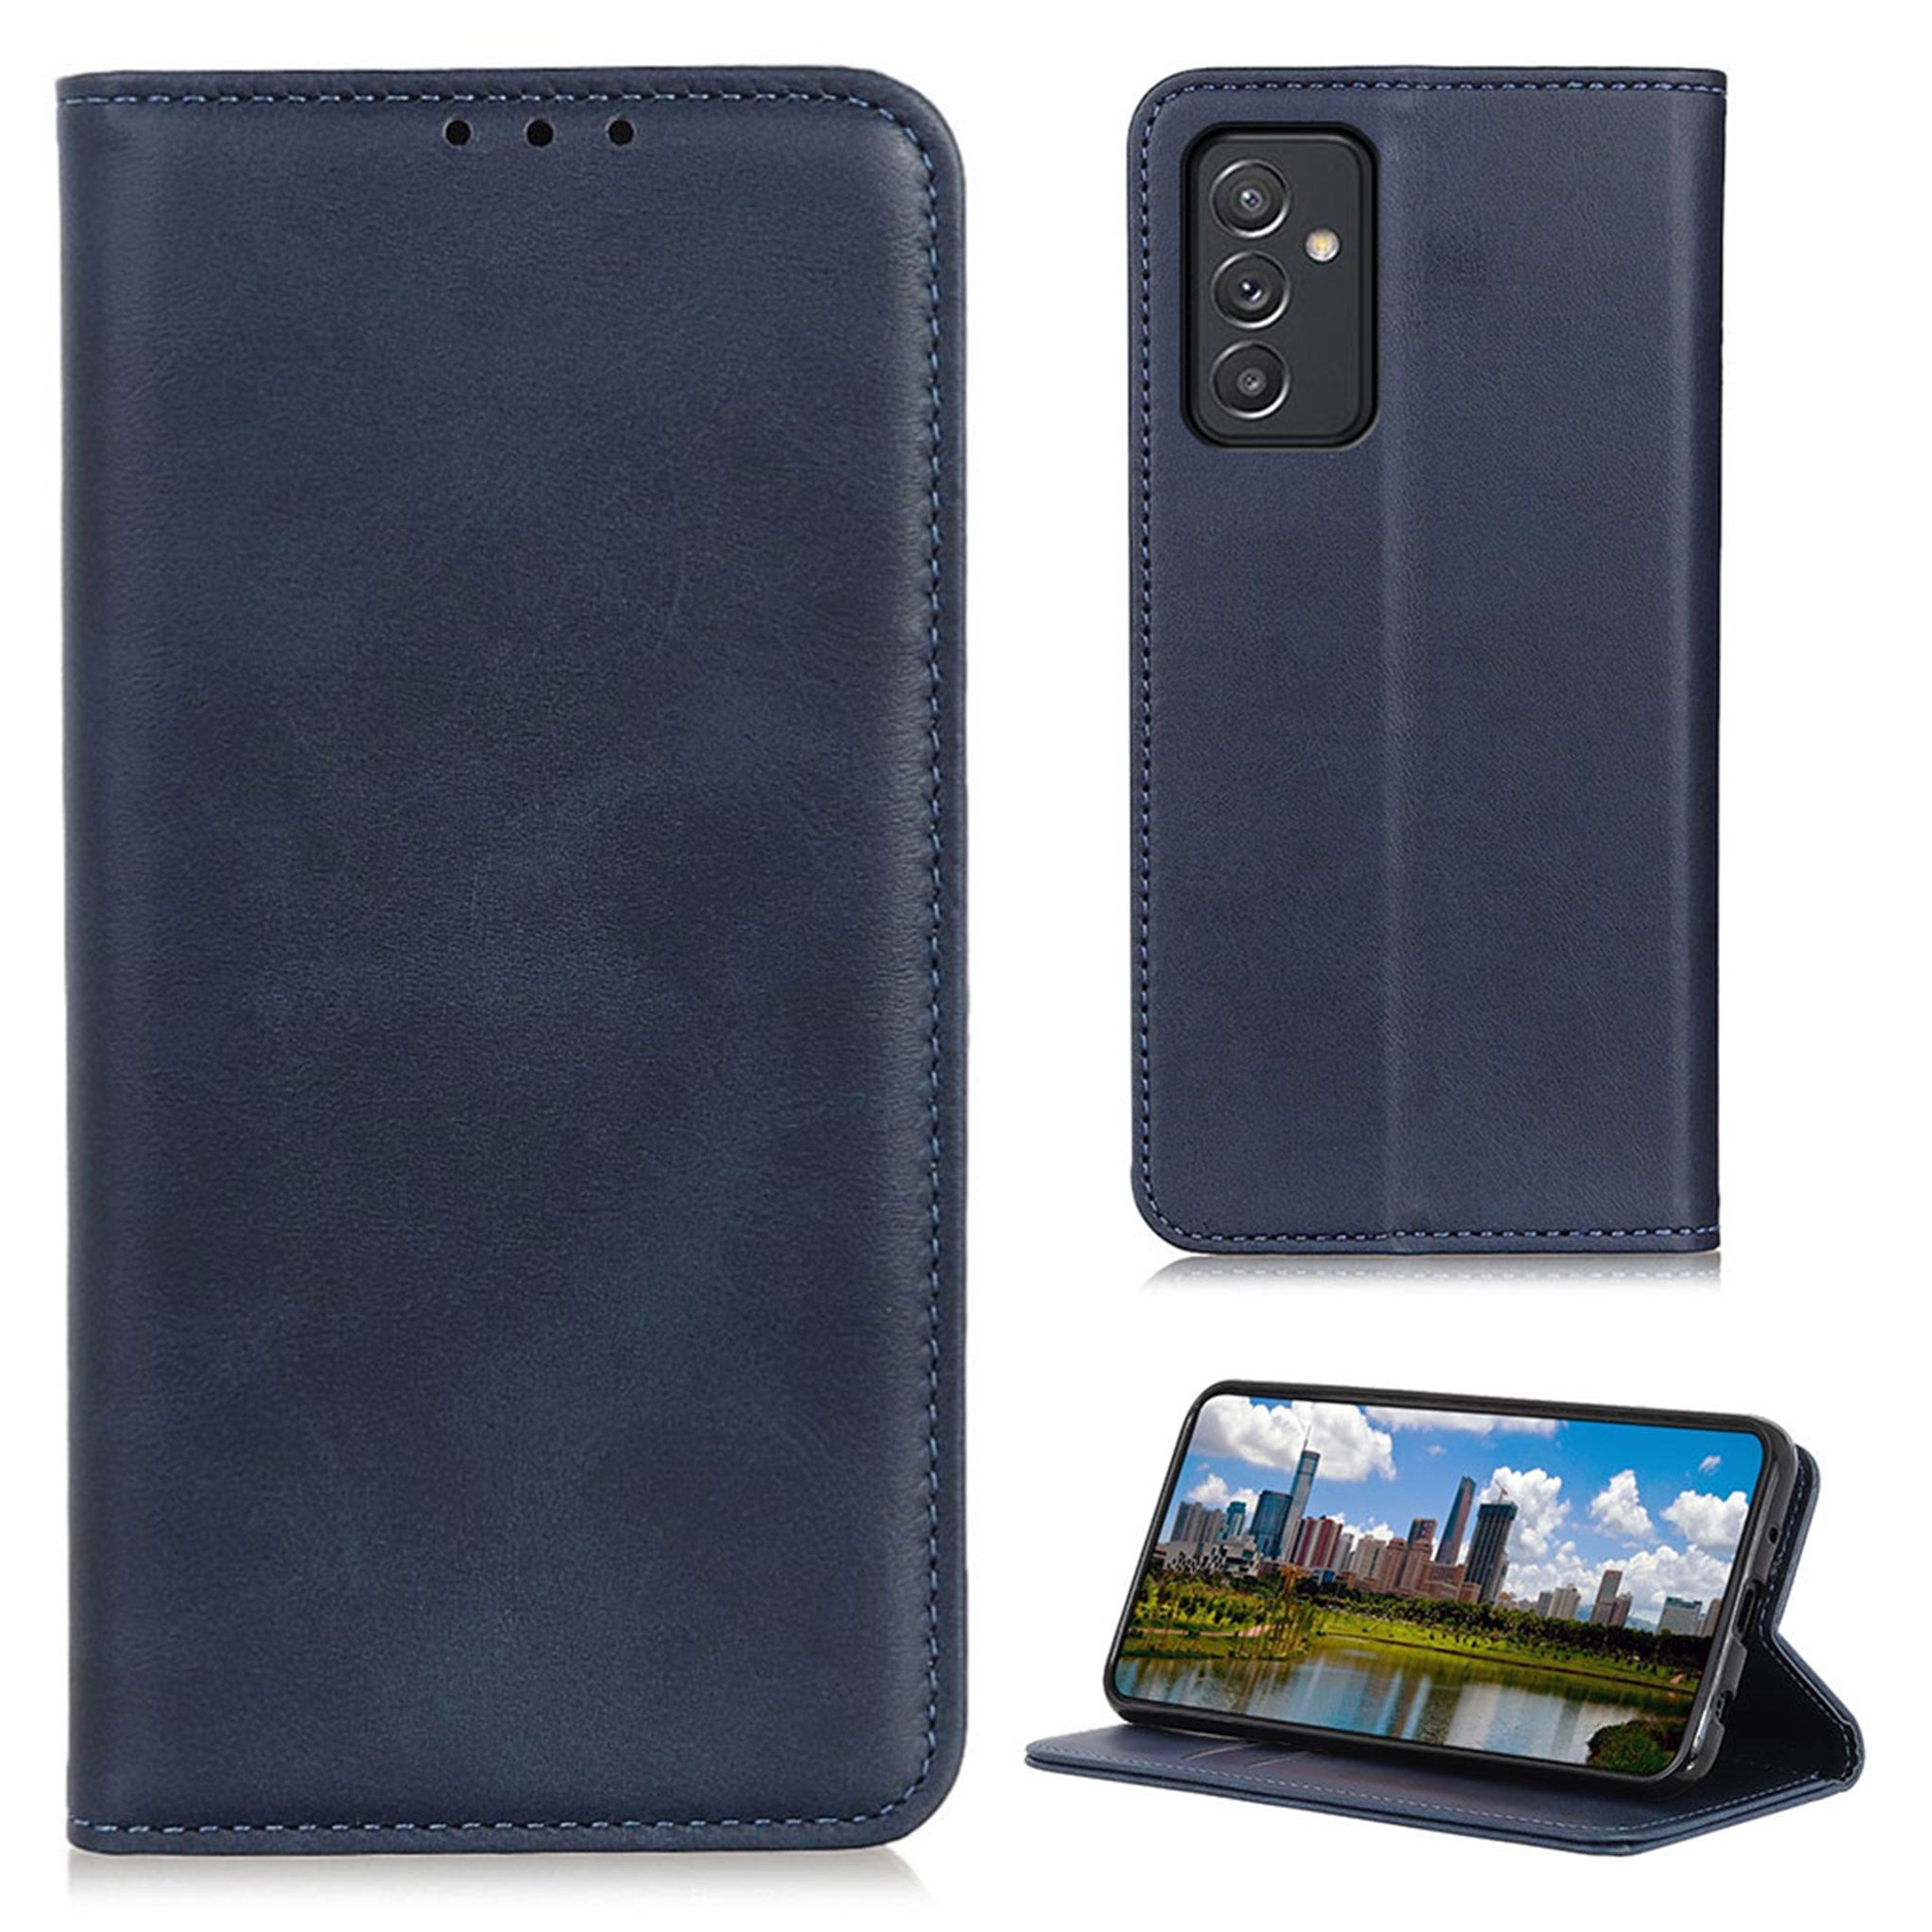 Wallet-style genuine leather flipcase for Samsung Galaxy A82 5G - Blue